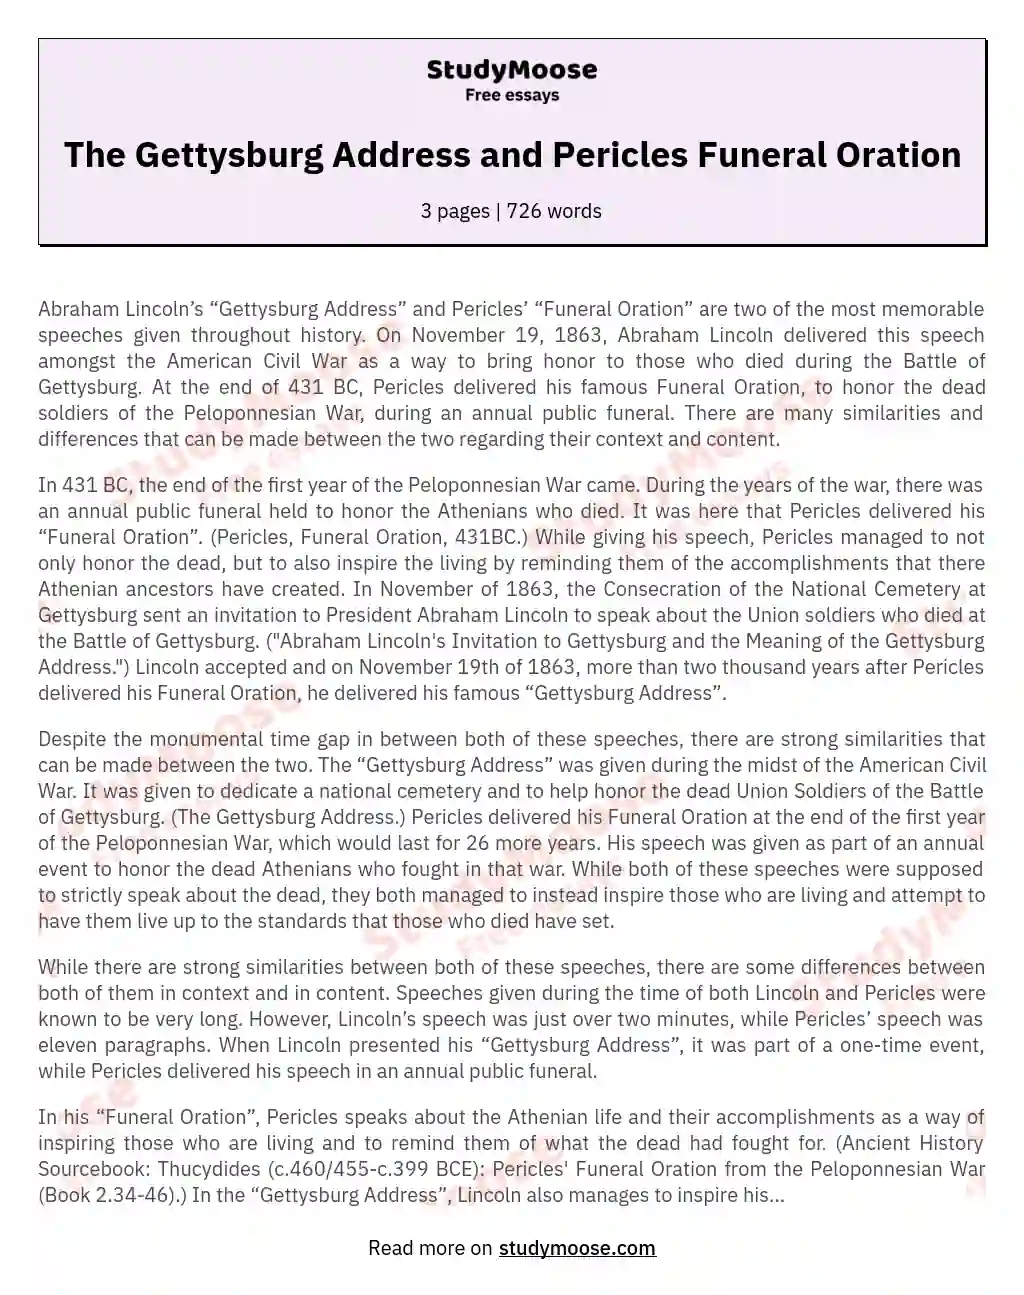 The Gettysburg Address and Pericles Funeral Oration